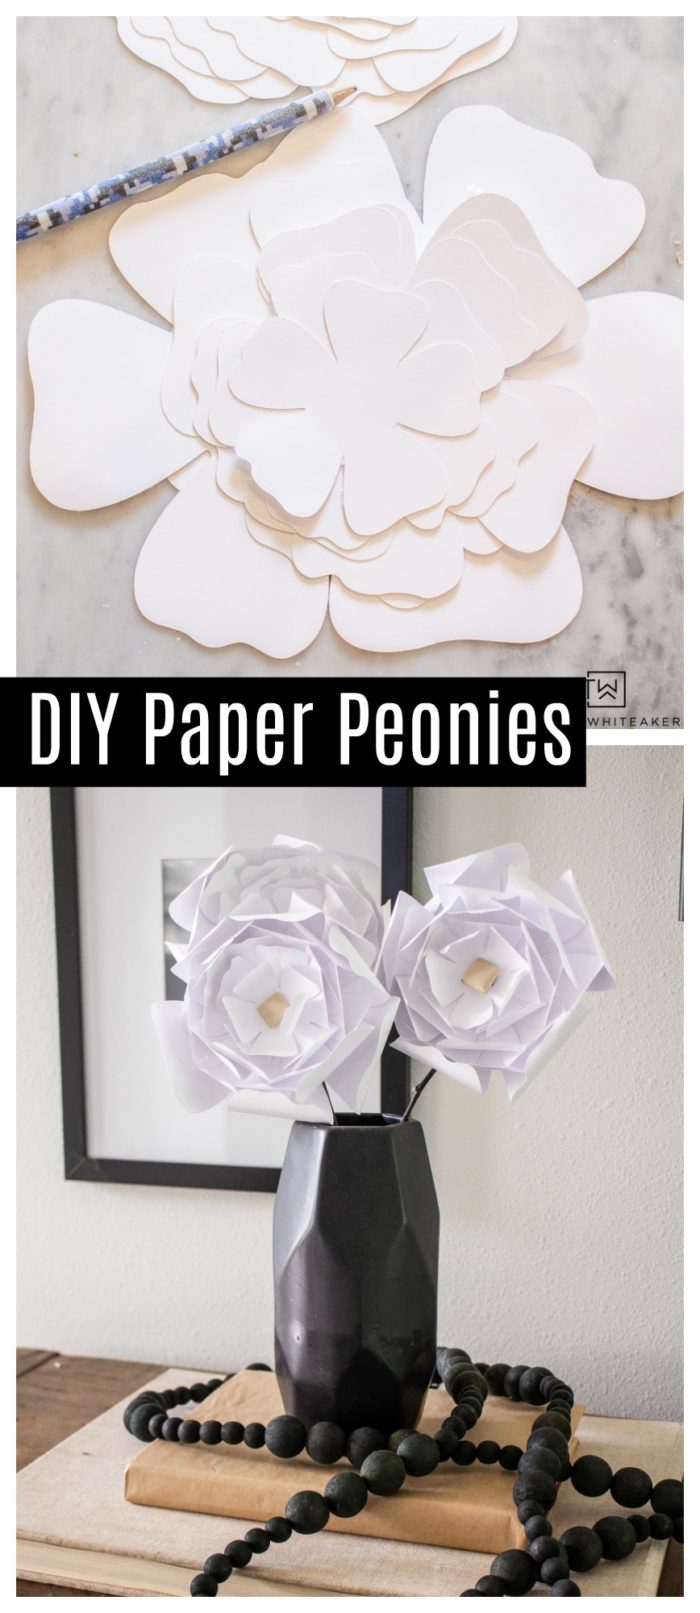 Learn how to make these easy DIY Paper Peonies using cardstock and some branches! They are a simple paper craft you can do with your Cricut Machine!